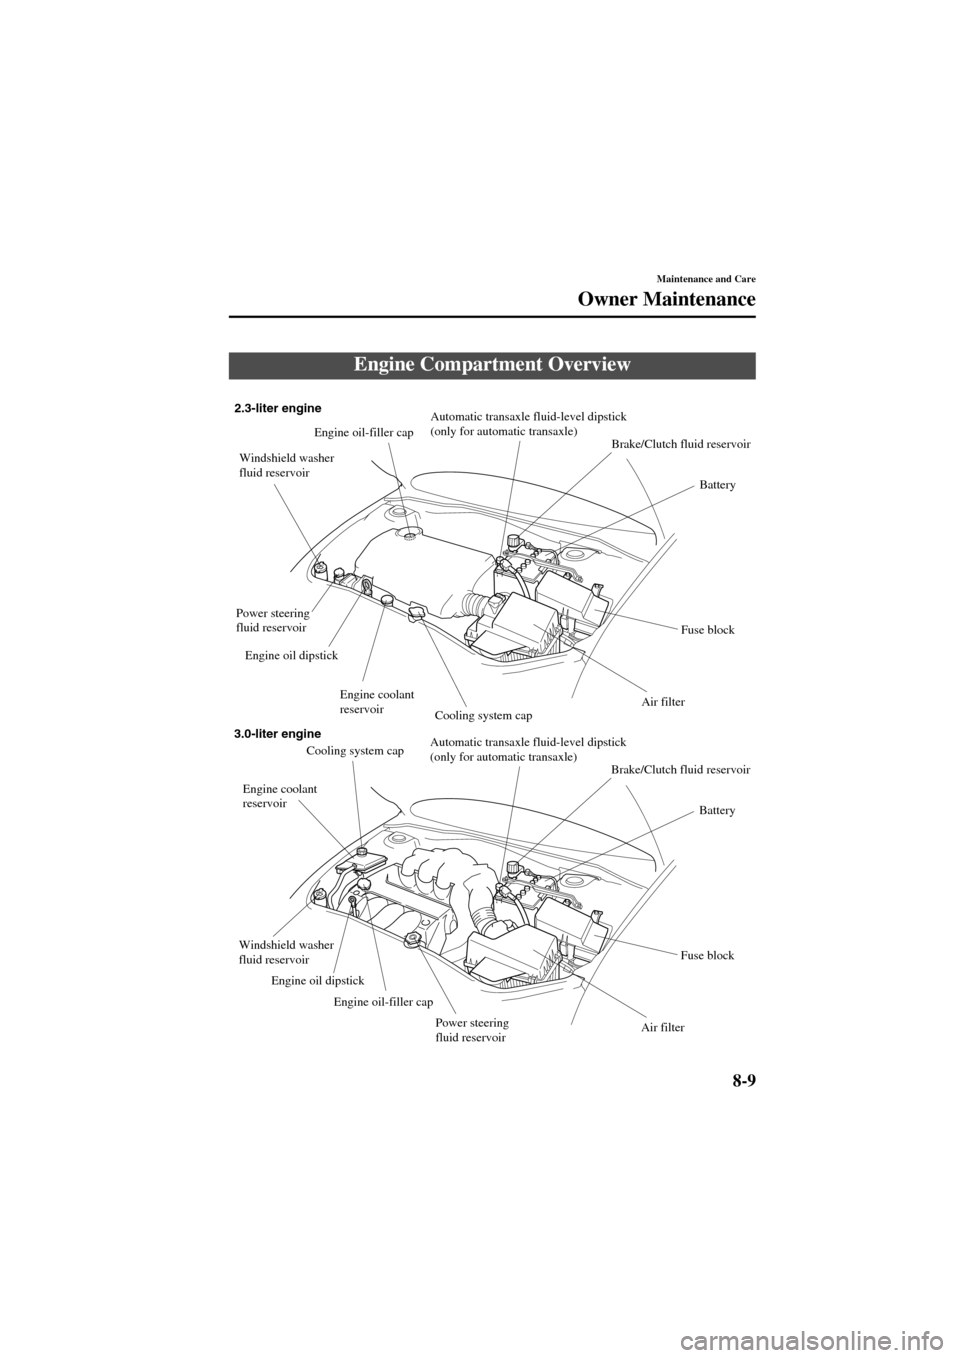 MAZDA MODEL 6 2004   (in English) User Guide 8-9
Maintenance and Care
Owner Maintenance
Form No. 8R29-EA-02I
Engine Compartment Overview
Automatic transaxle fluid-level dipstick
(only for automatic transaxle) 
Cooling system cap Power steering 
